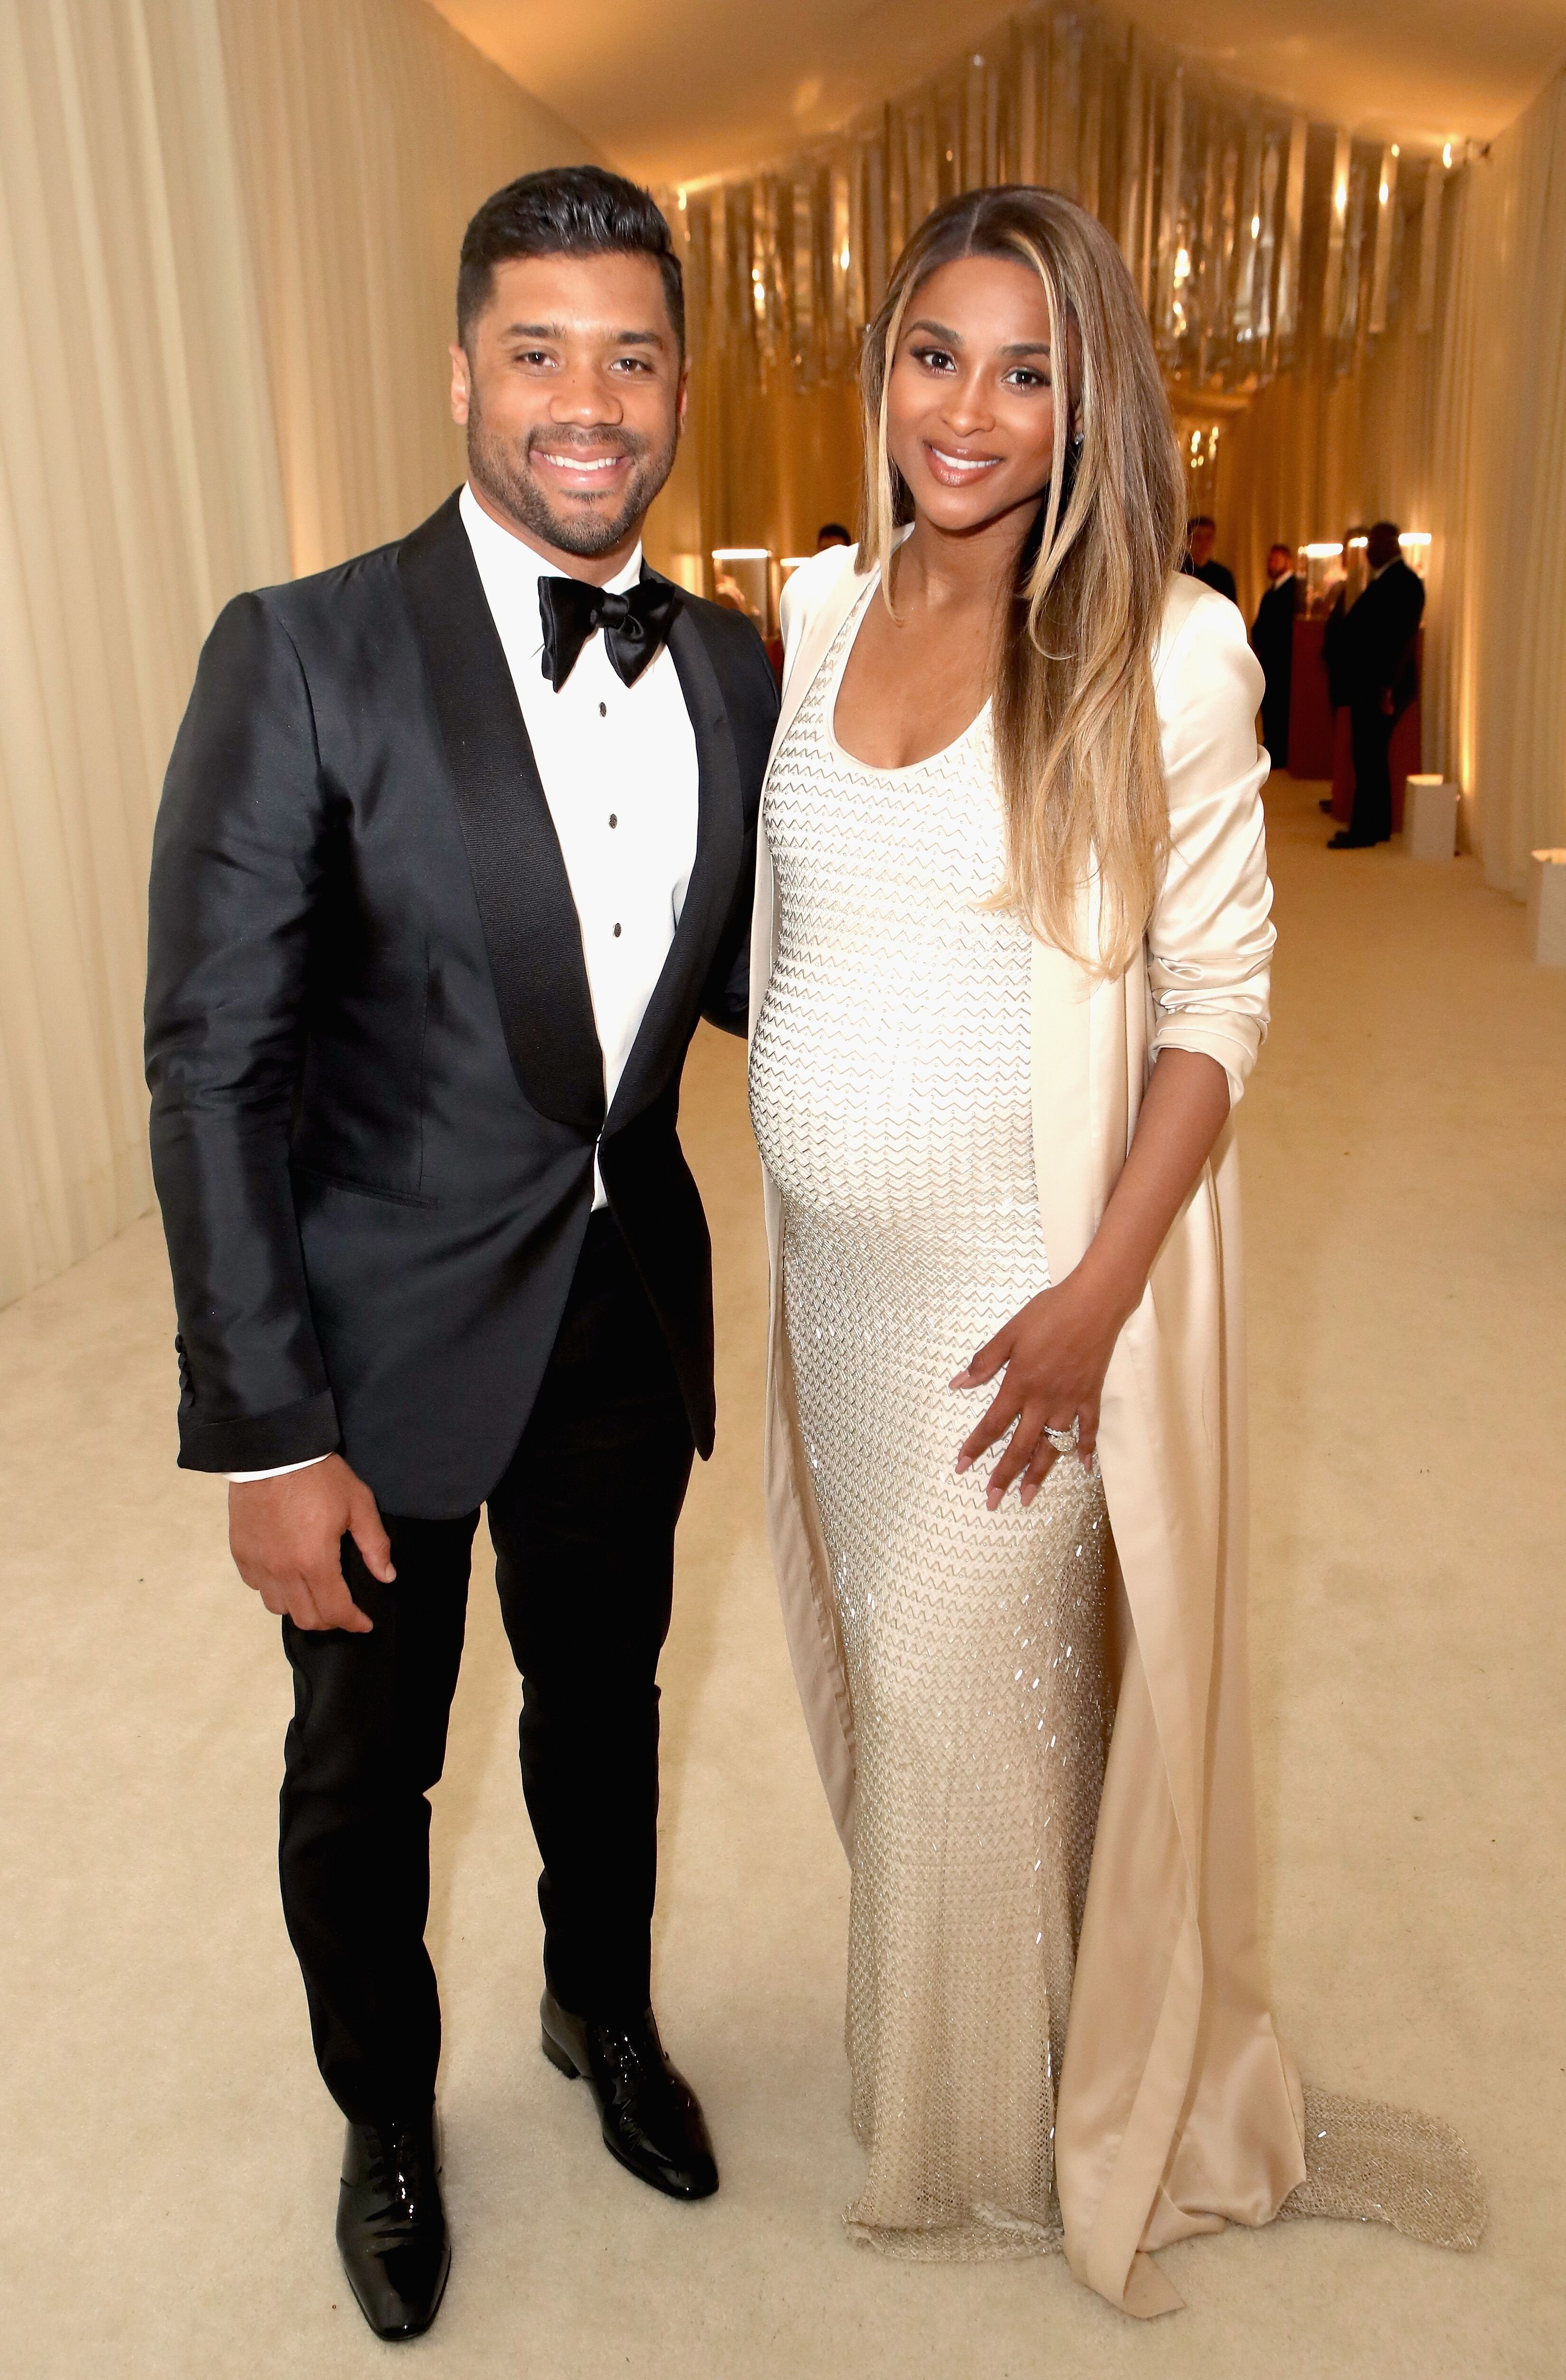  Football player Russell Wilson (L) and singer Ciara attend the 25th Annual Elton John AIDS Foundation's Academy Awards Viewing Party at The City of West Hollywood Park | Photo: Getty Images